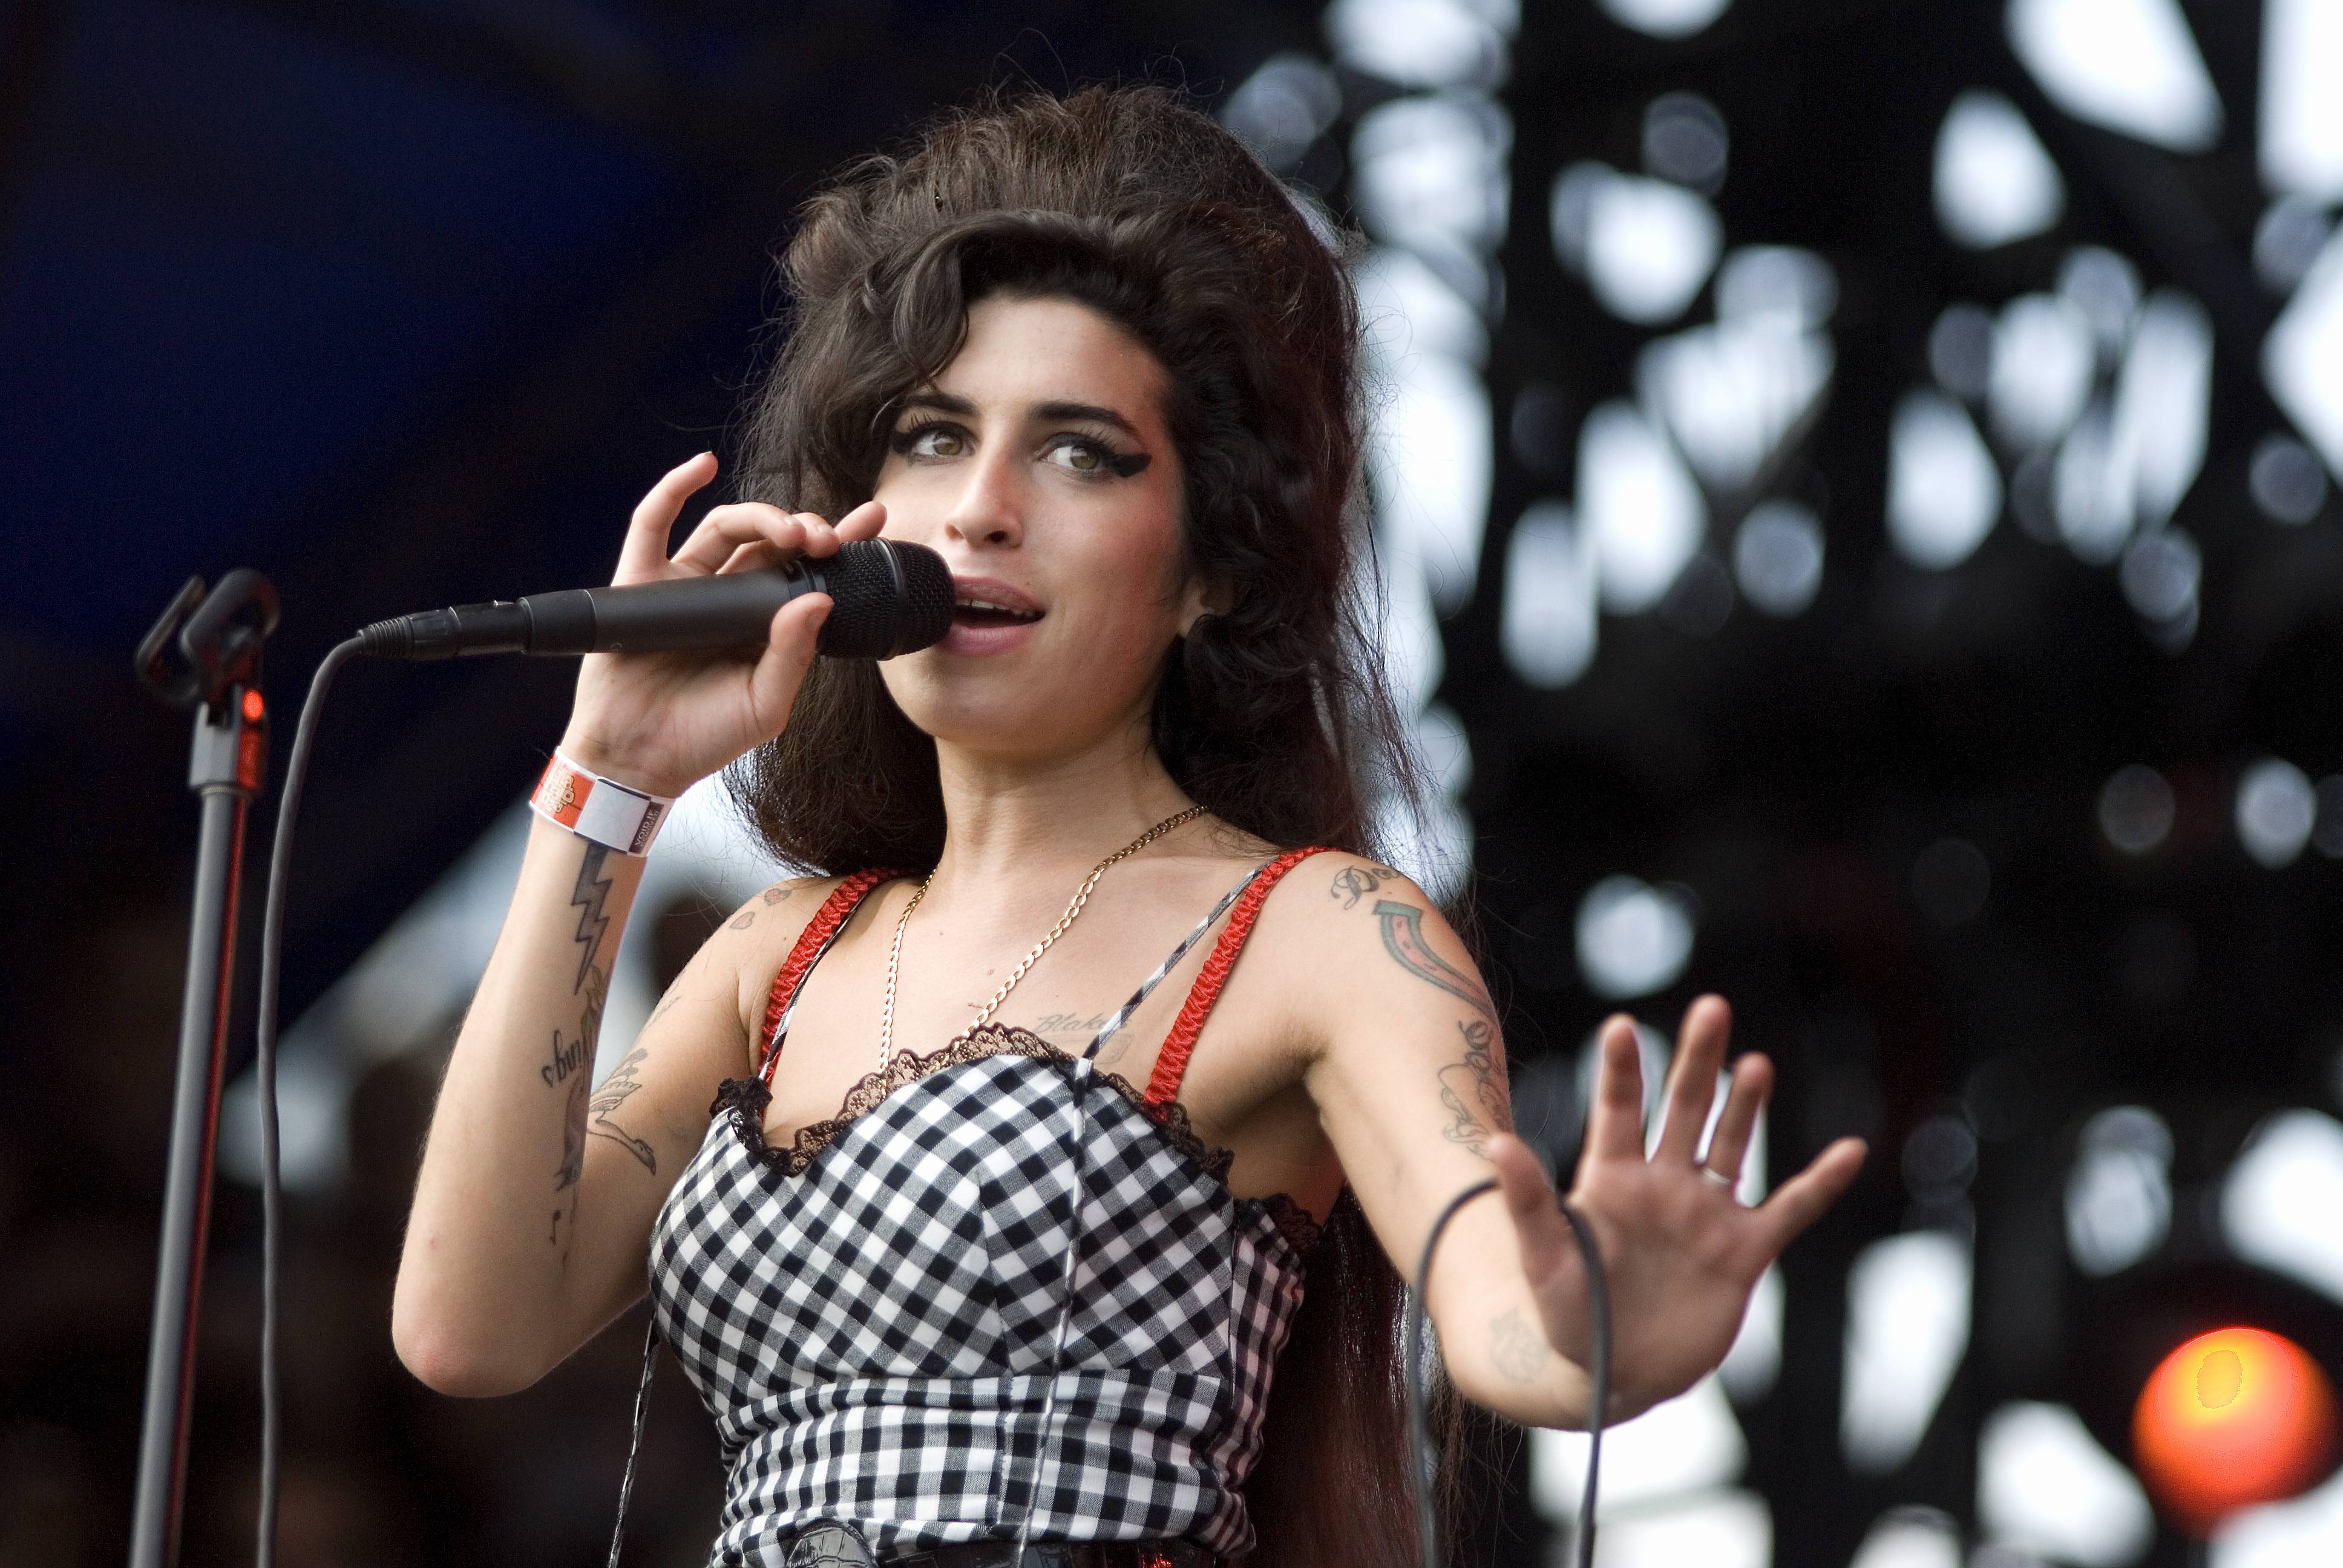 Amy Winehouse performing on stage at LOLLAPALOOZA in August 2005 | Photo: Getty Images